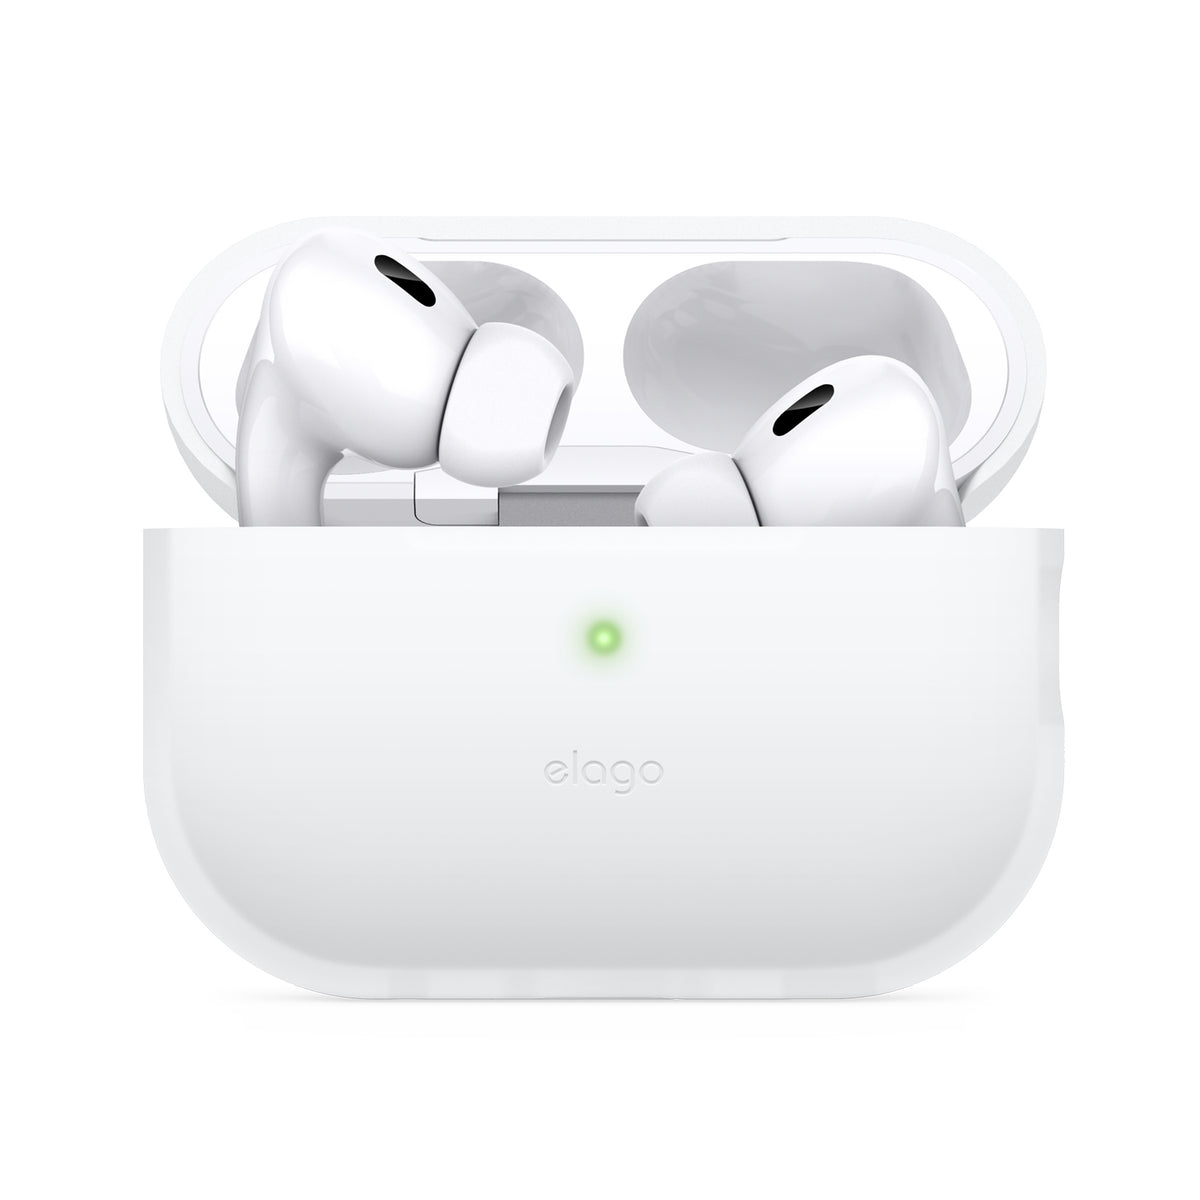 Apple AirPods Pro 2, white, Charging case (MagSafe), USB-C, €234